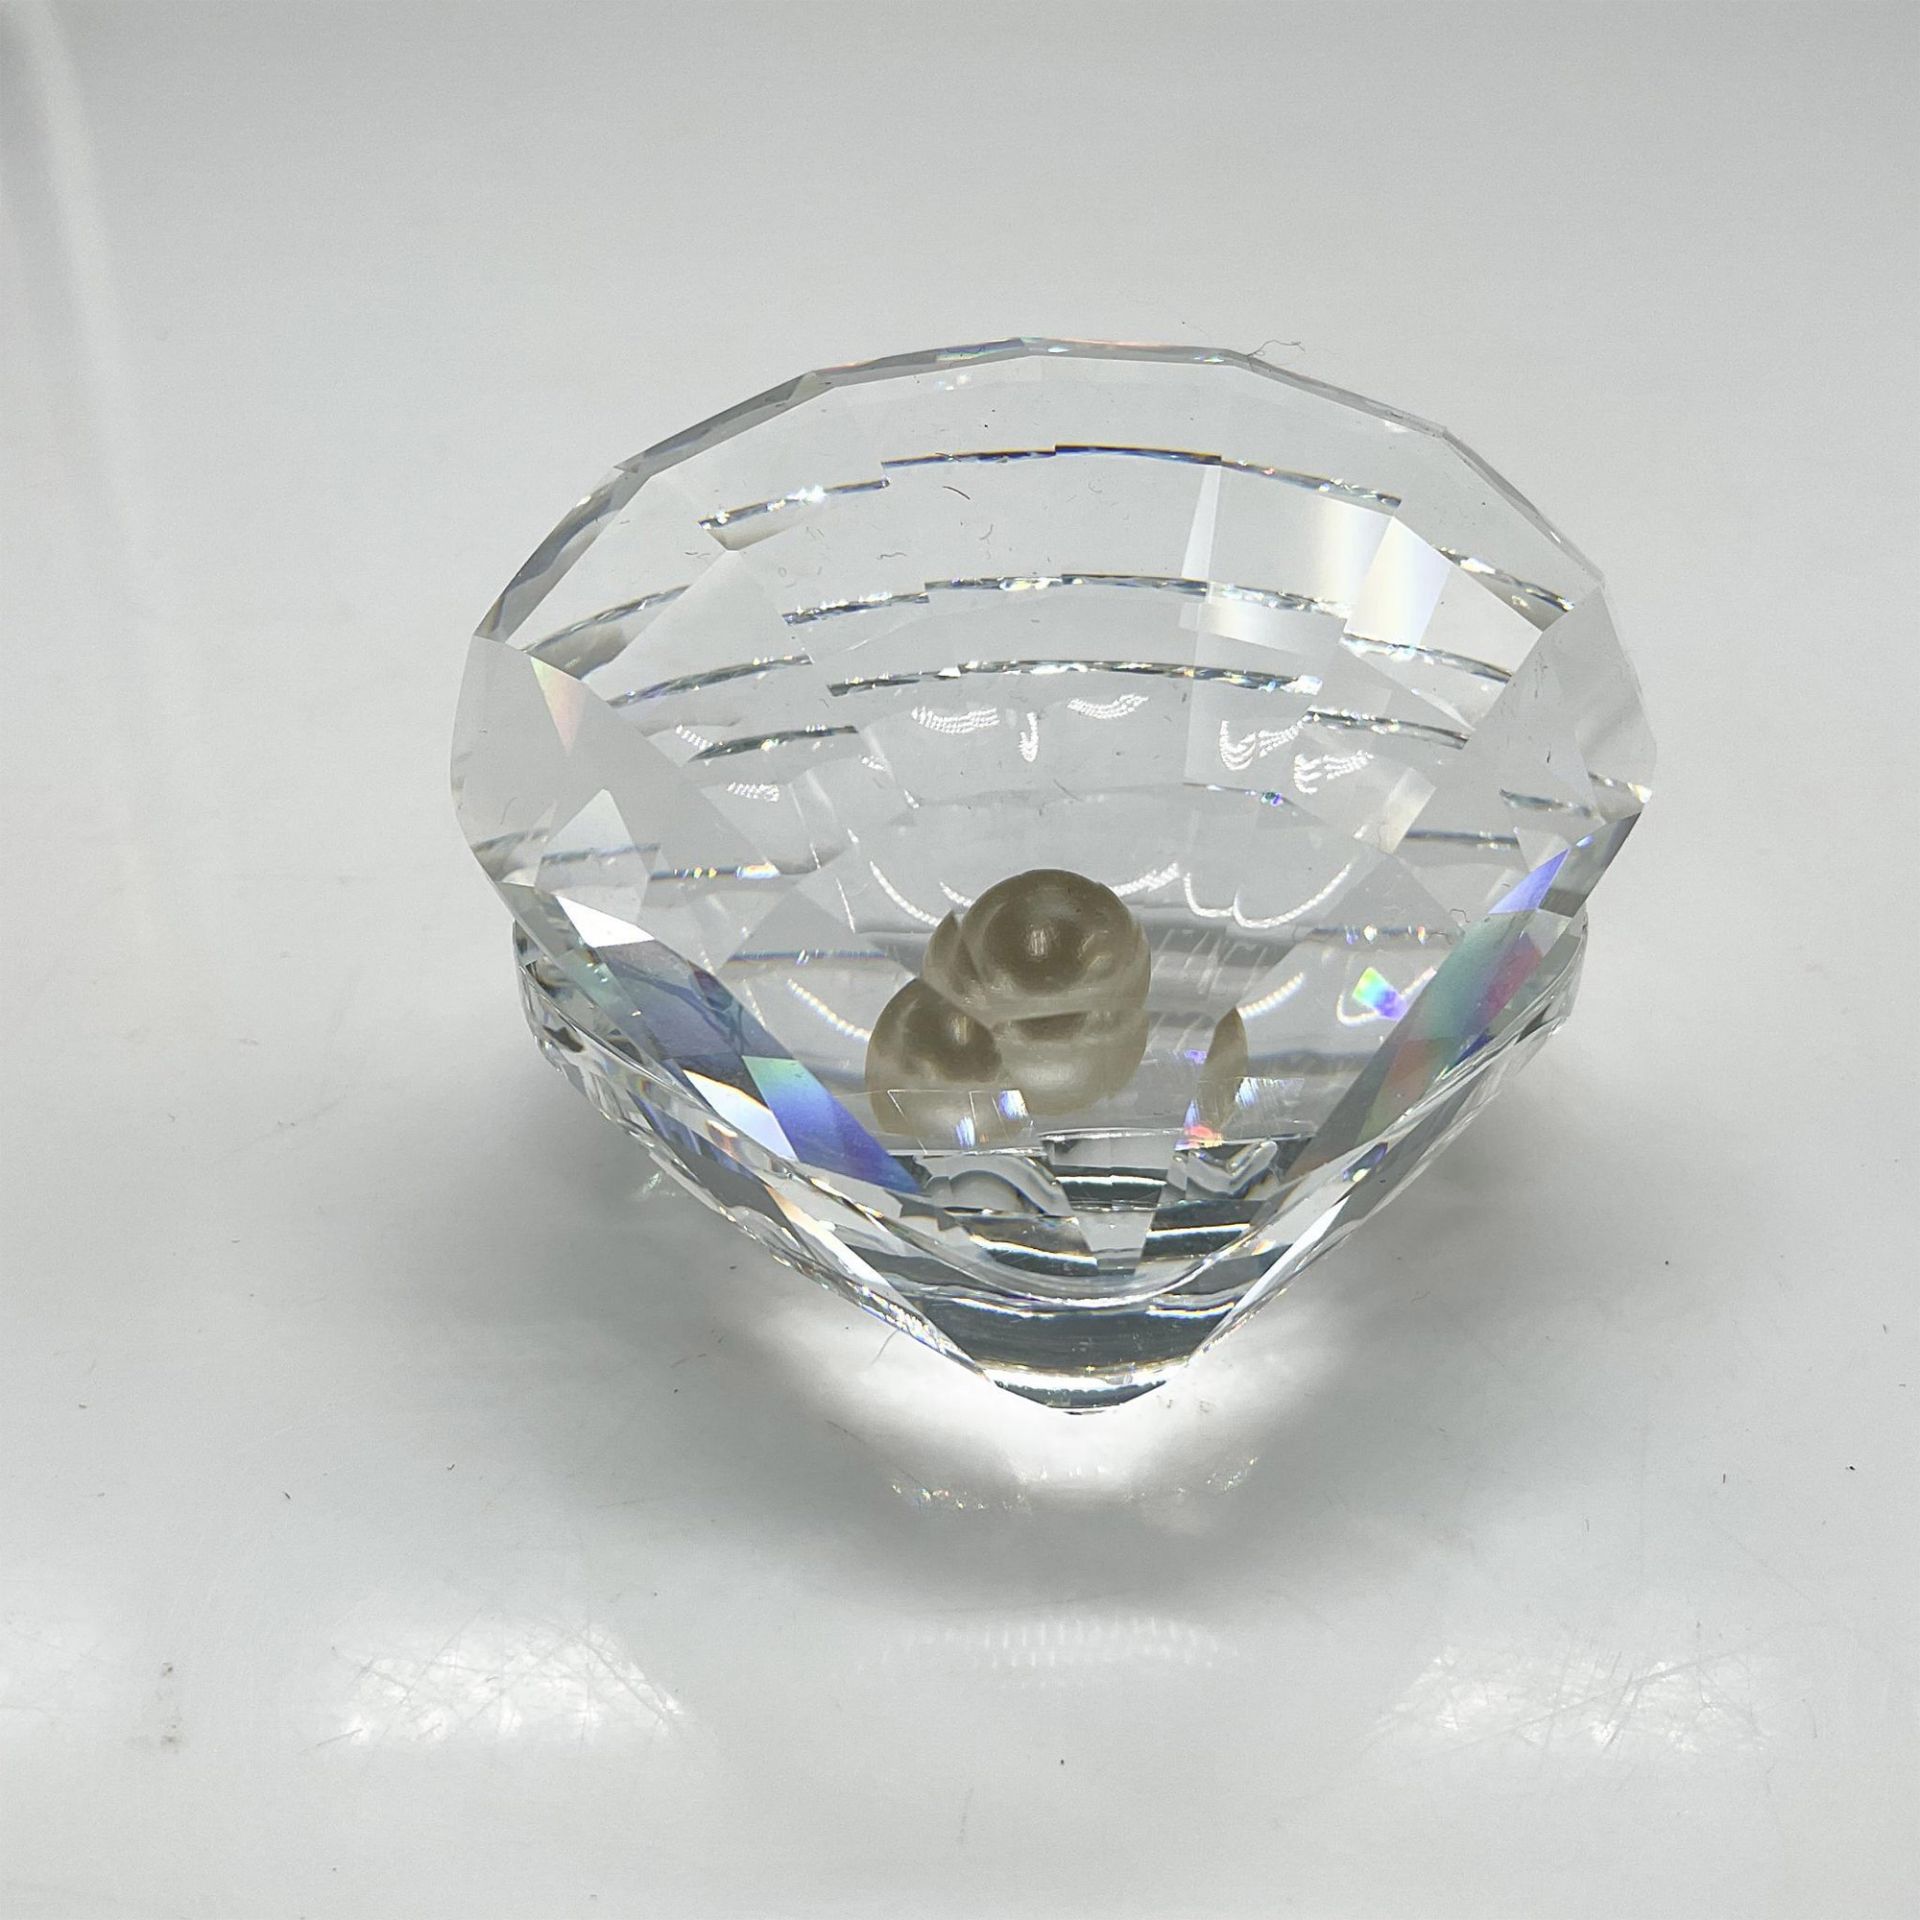 Swarovski Silver Crystal Figurine, Oyster Shell with Pearl - Image 2 of 4